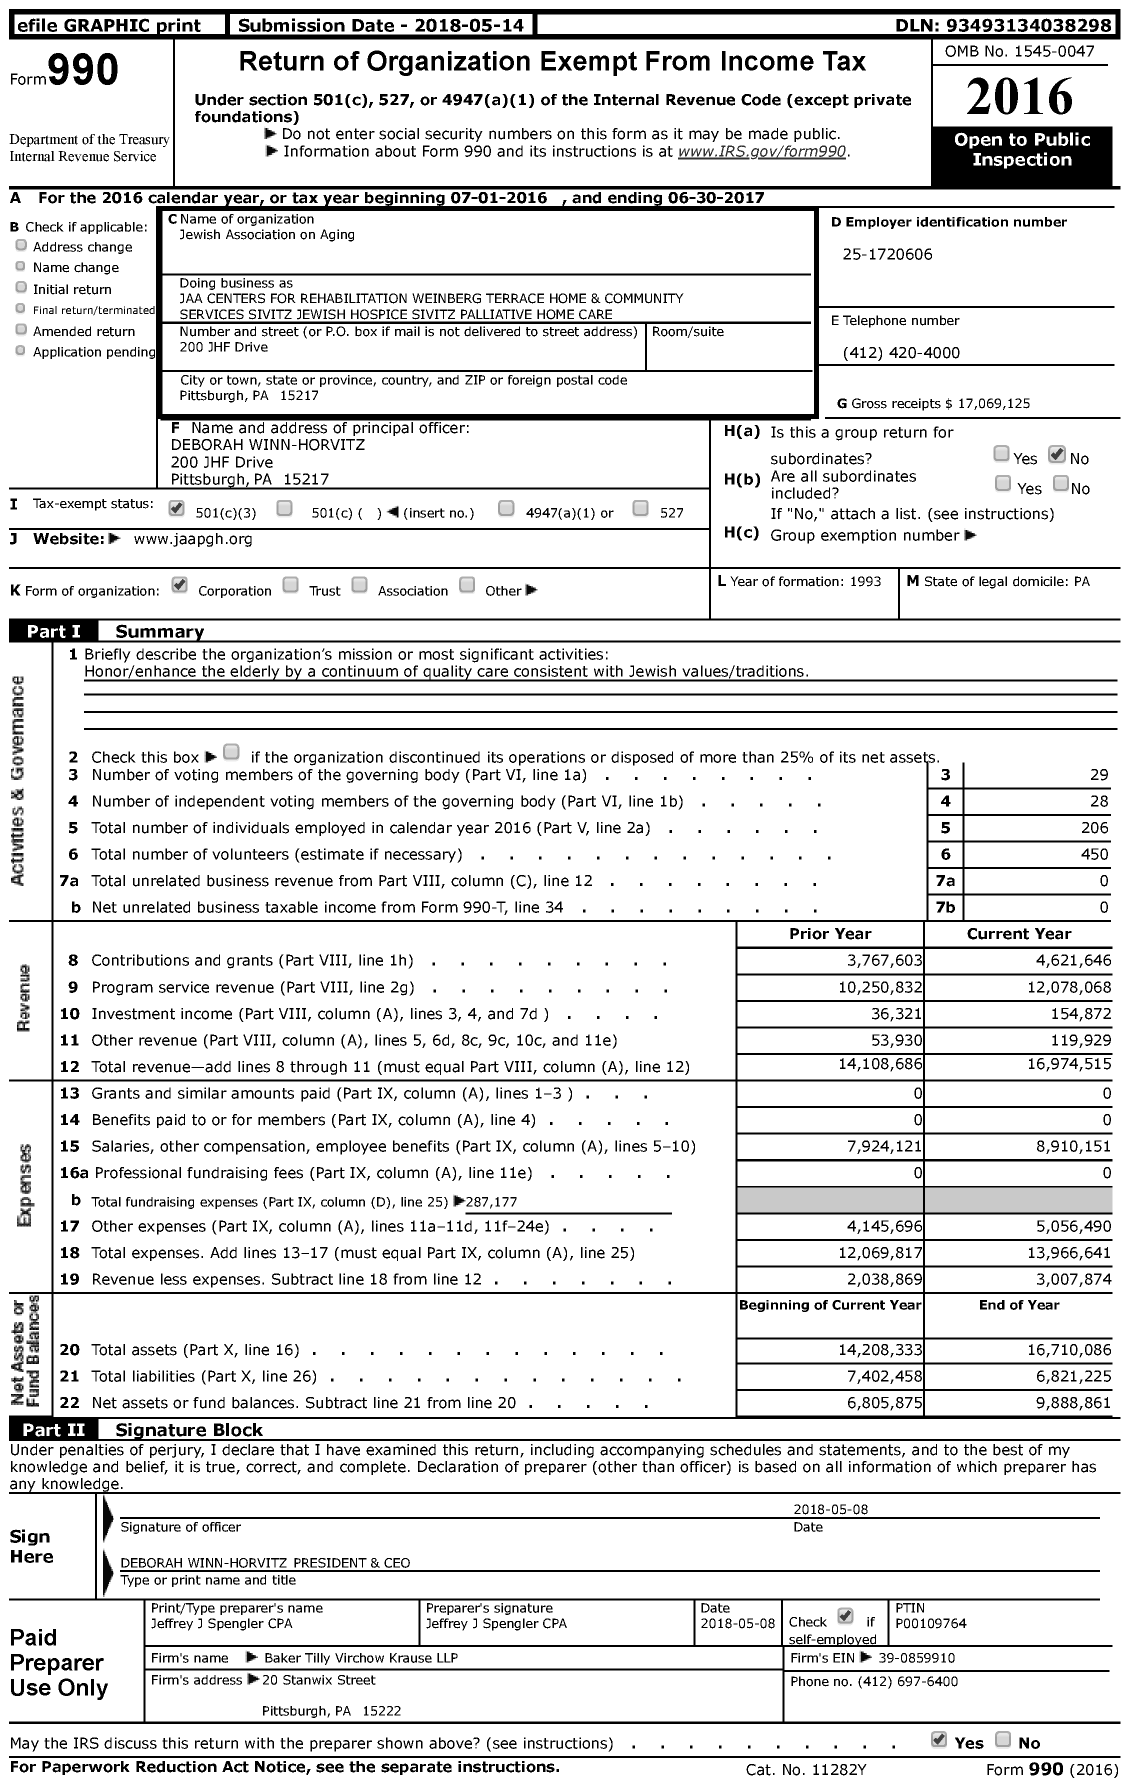 Image of first page of 2016 Form 990 for Jaa Centers for Rehabilitation Weinberg Terrace Home Health Services and Sivitz Hospice and Palliative Care (JAA)